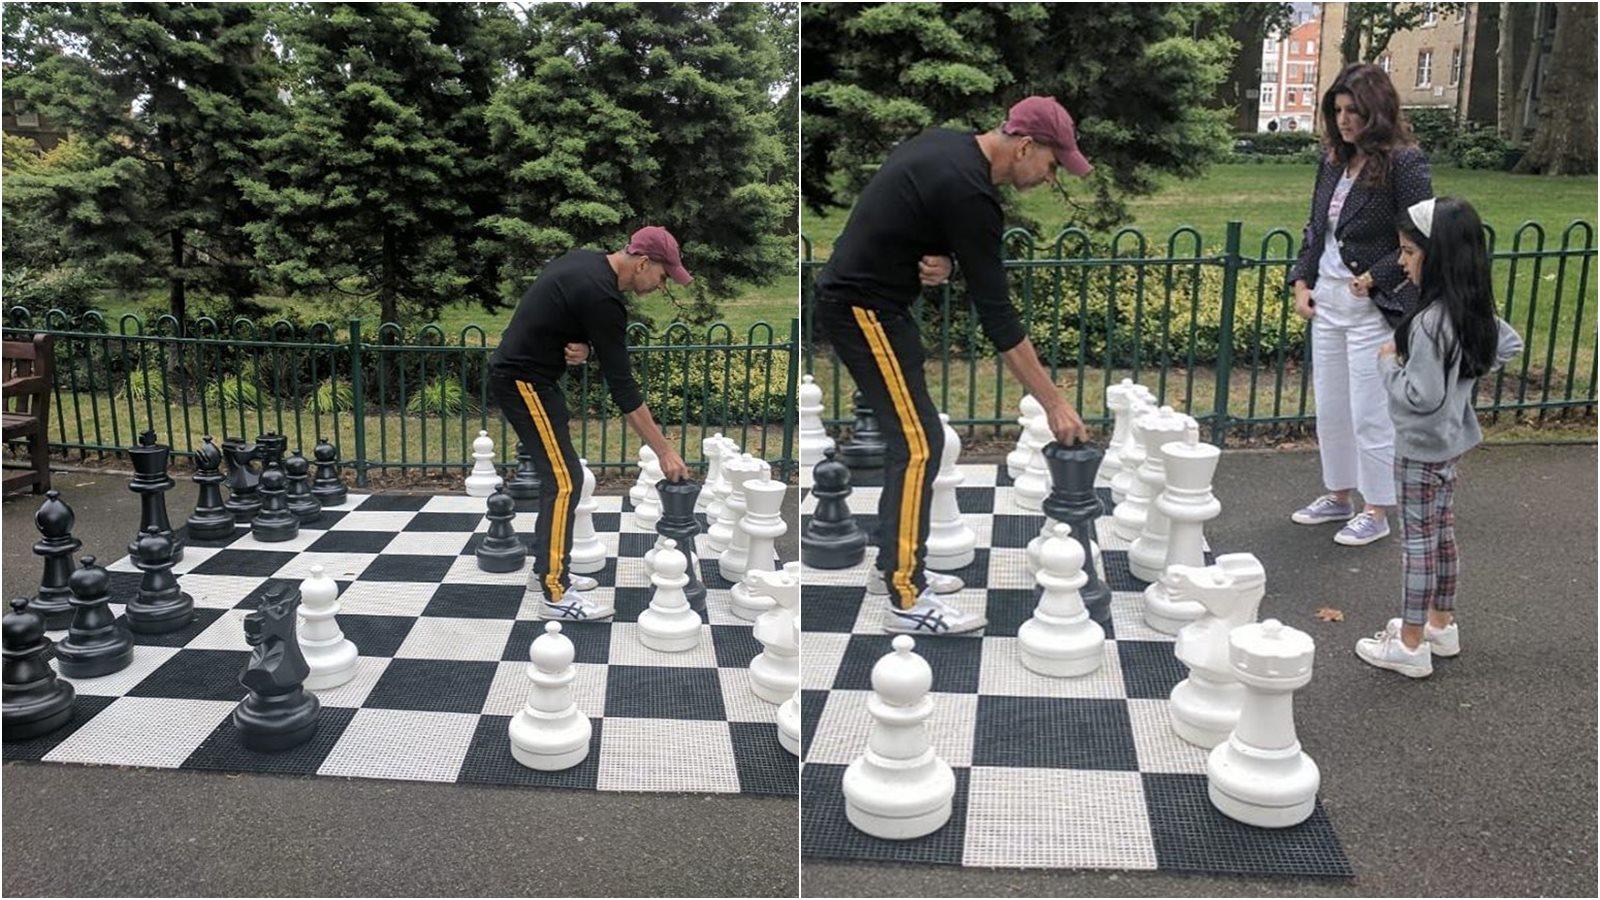 Akshay Kumar Shows Off Chess Skills Plays Game With Wife Twinkle Khanna And Daughter Nitara Hindi Movie News Bollywood Times Of India